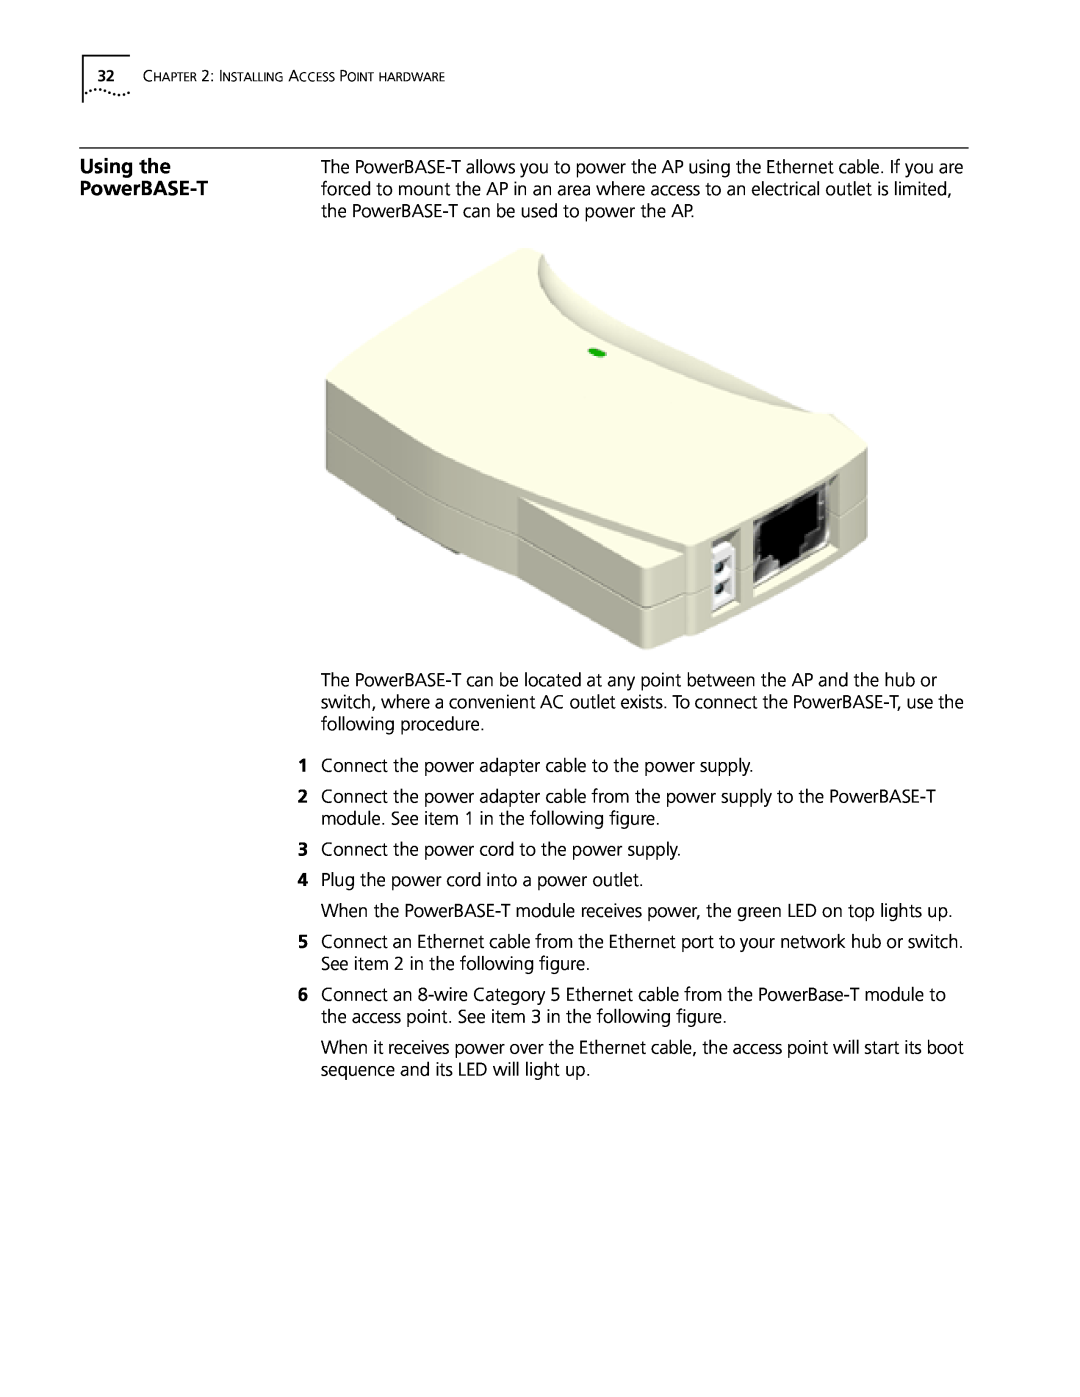 Cabletron Systems 3Com manual Using the, PowerBASE-T 